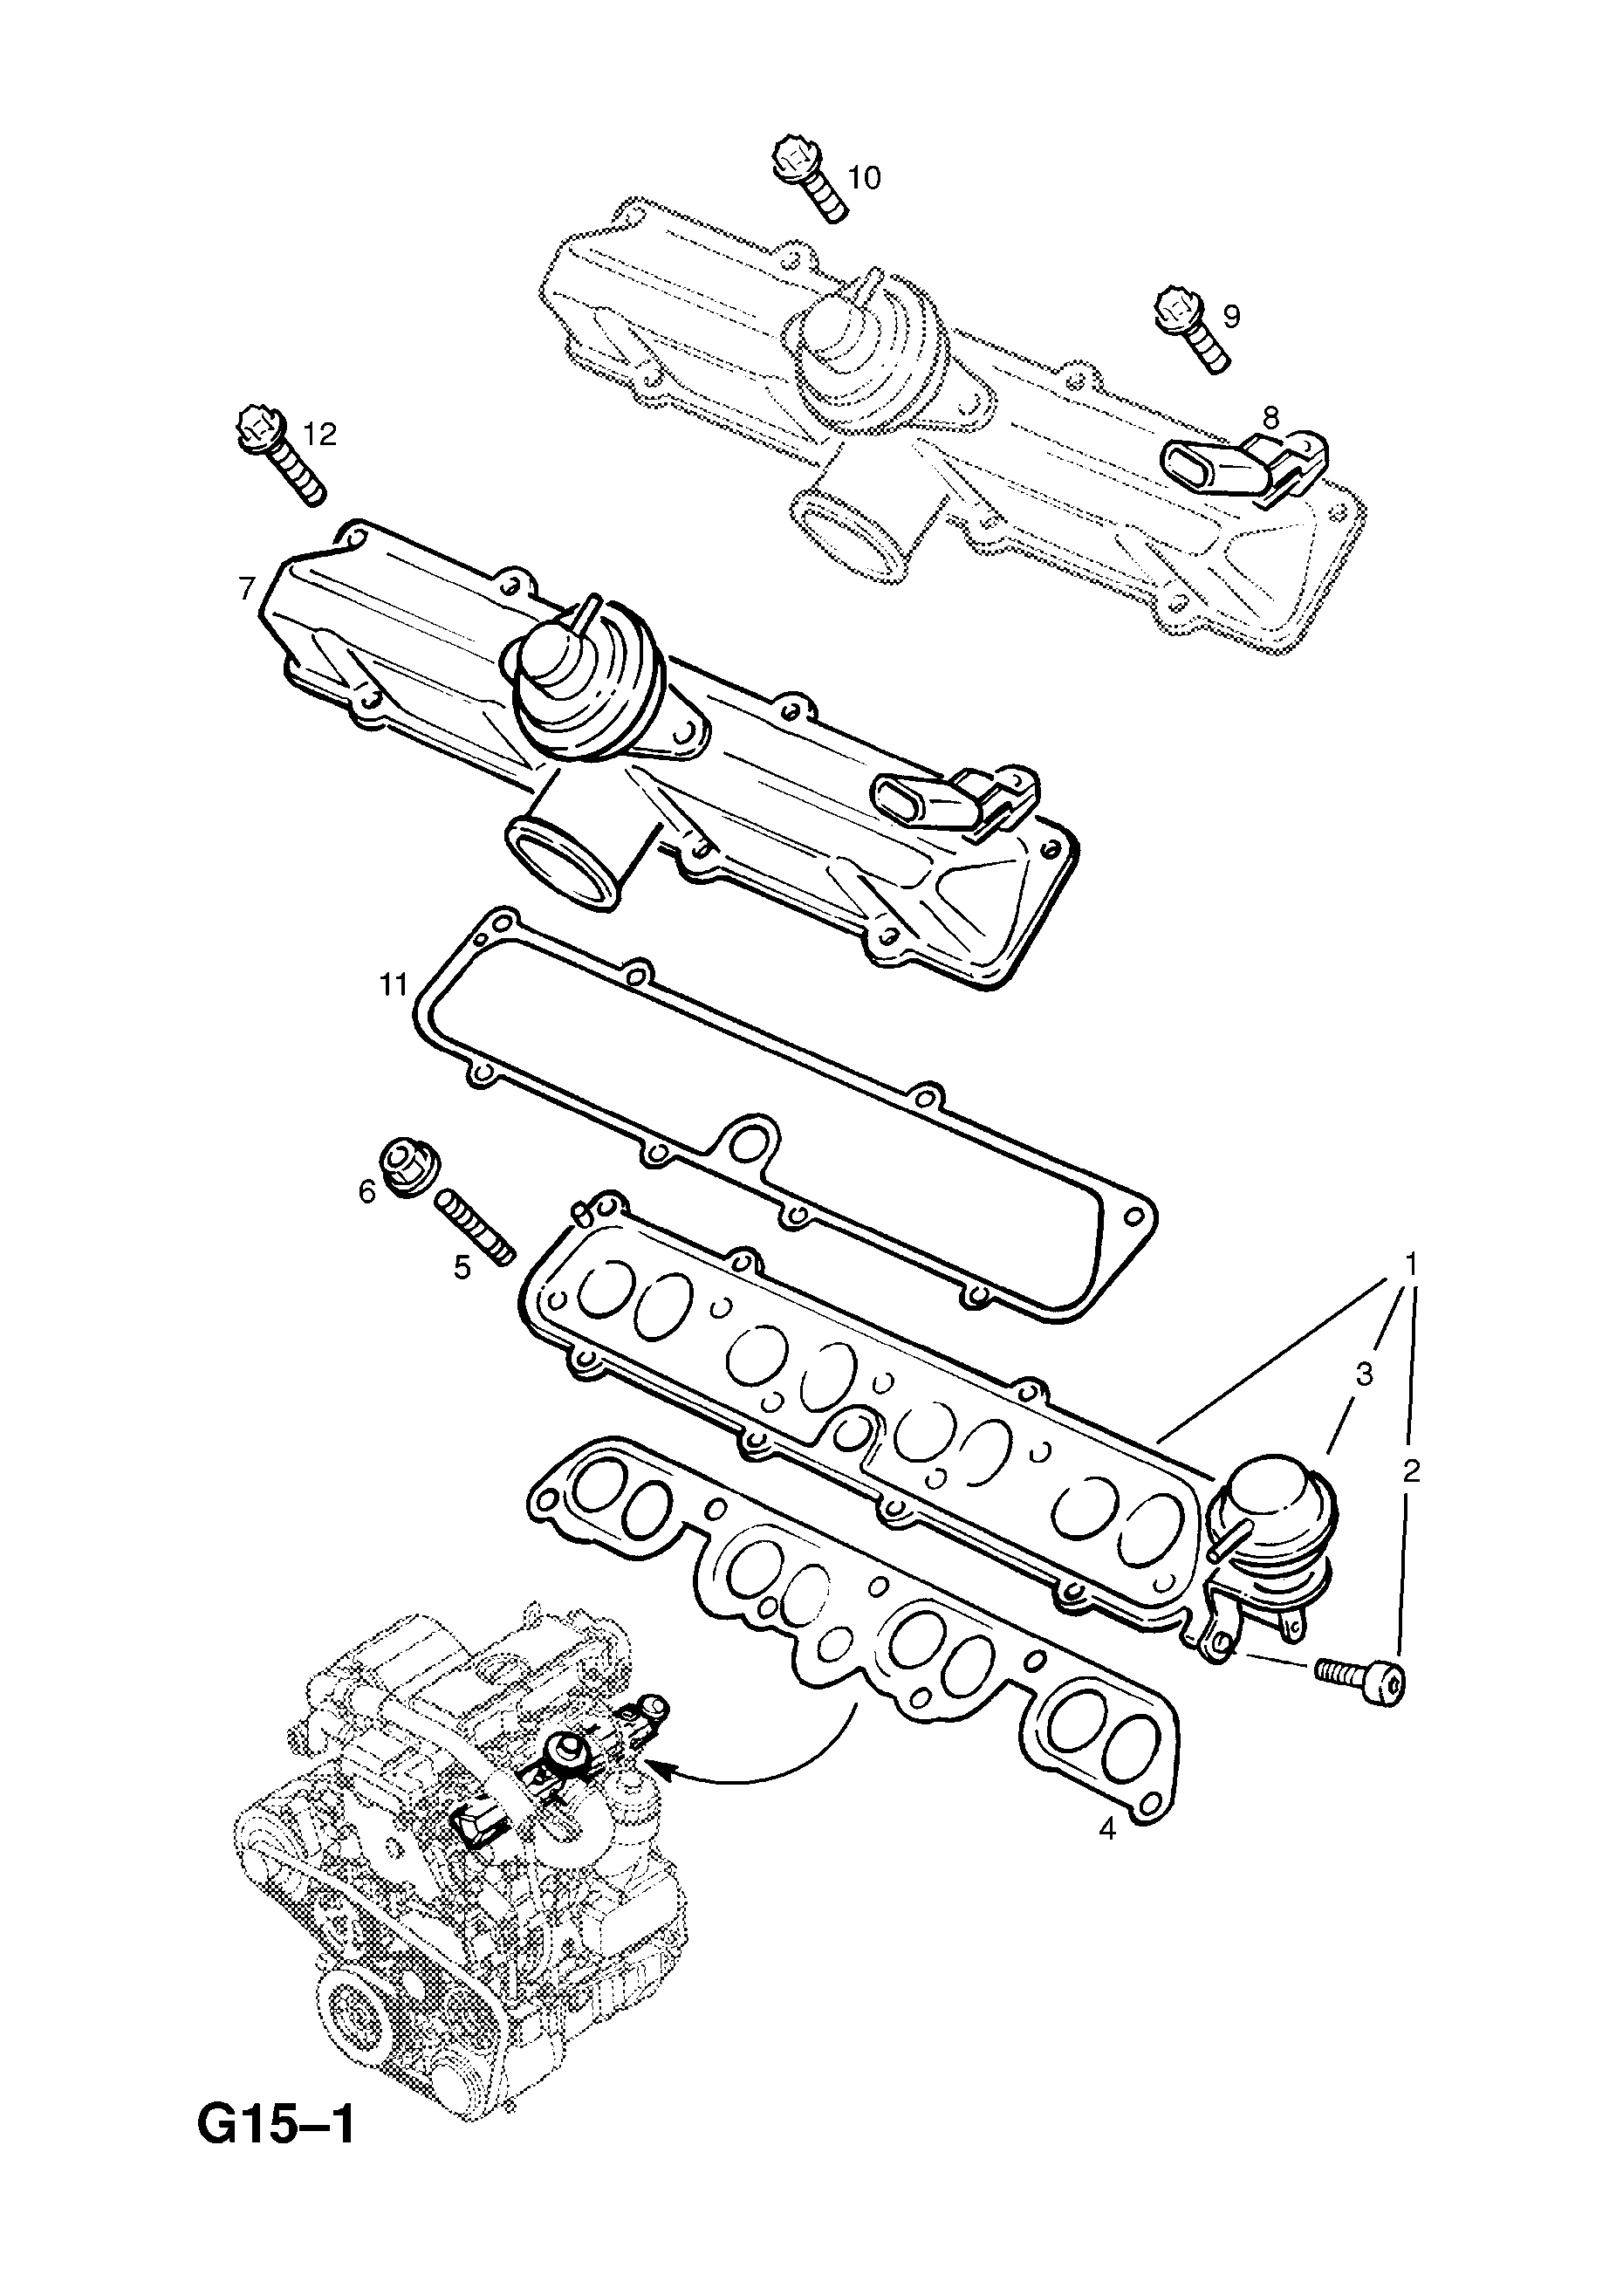 INDUCTION MANIFOLD (CONTD.) <small><i>[X22DTH TURBO-DIESEL ENGINE]</i></small>